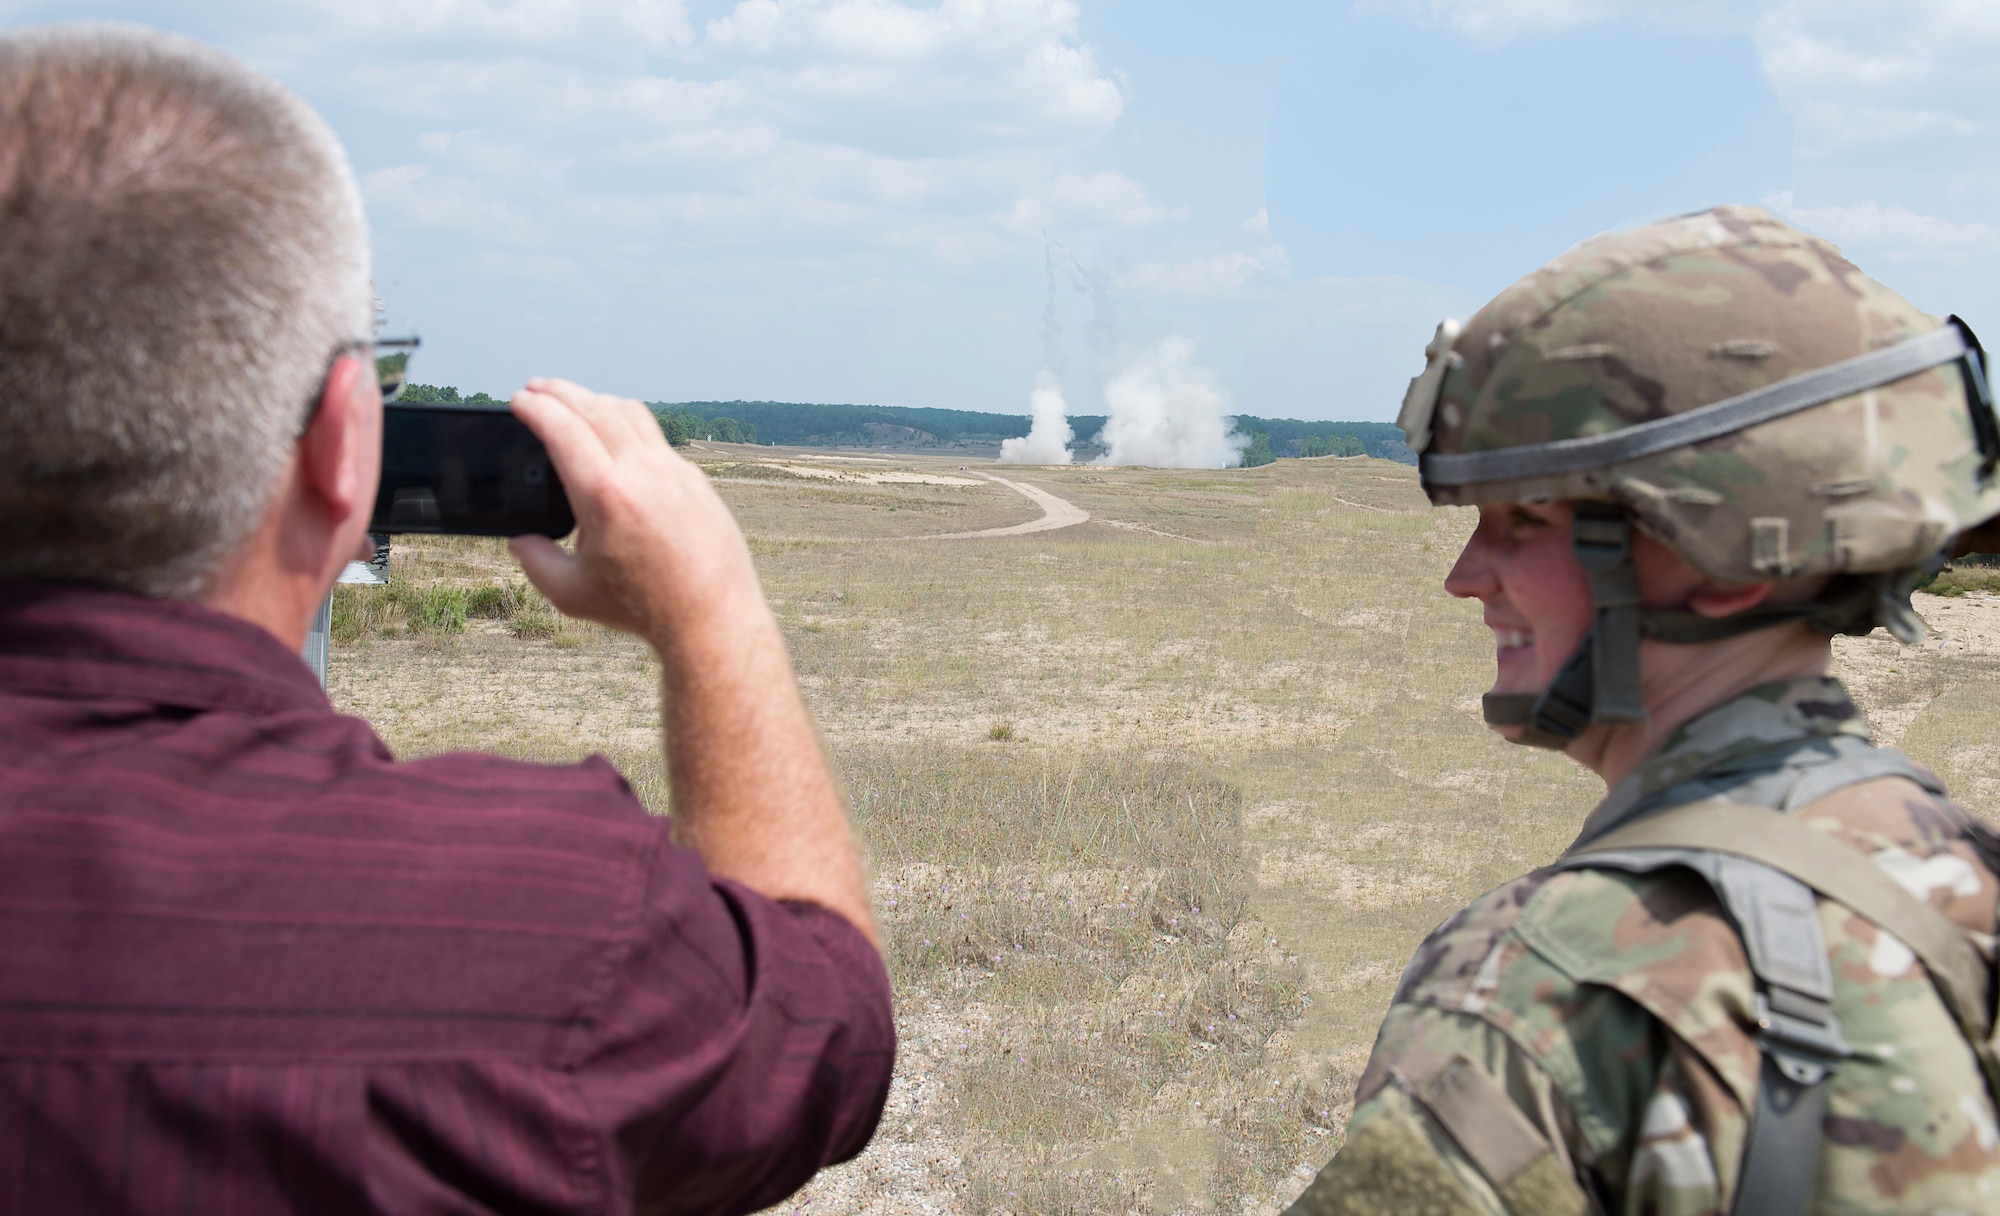 Spc. Heather M. Cote, a supply specialist assigned to the 197th Field Artillery Brigade, N.H. Army National Guard, smiles as her civilian employer, John Mercier records a HIMARS rocket launch demonstration on Aug. 14, 2018 at Camp Grayling, Mich. Mercier, and othe employers, visited their citizen-soldier employees during their annual training event as part of a tour with the N.H. Employer Support of the Guard and Reserve. (Photo by Staff Sgt. Kayla White, 157th Air Refueling Wing Public Affairs)